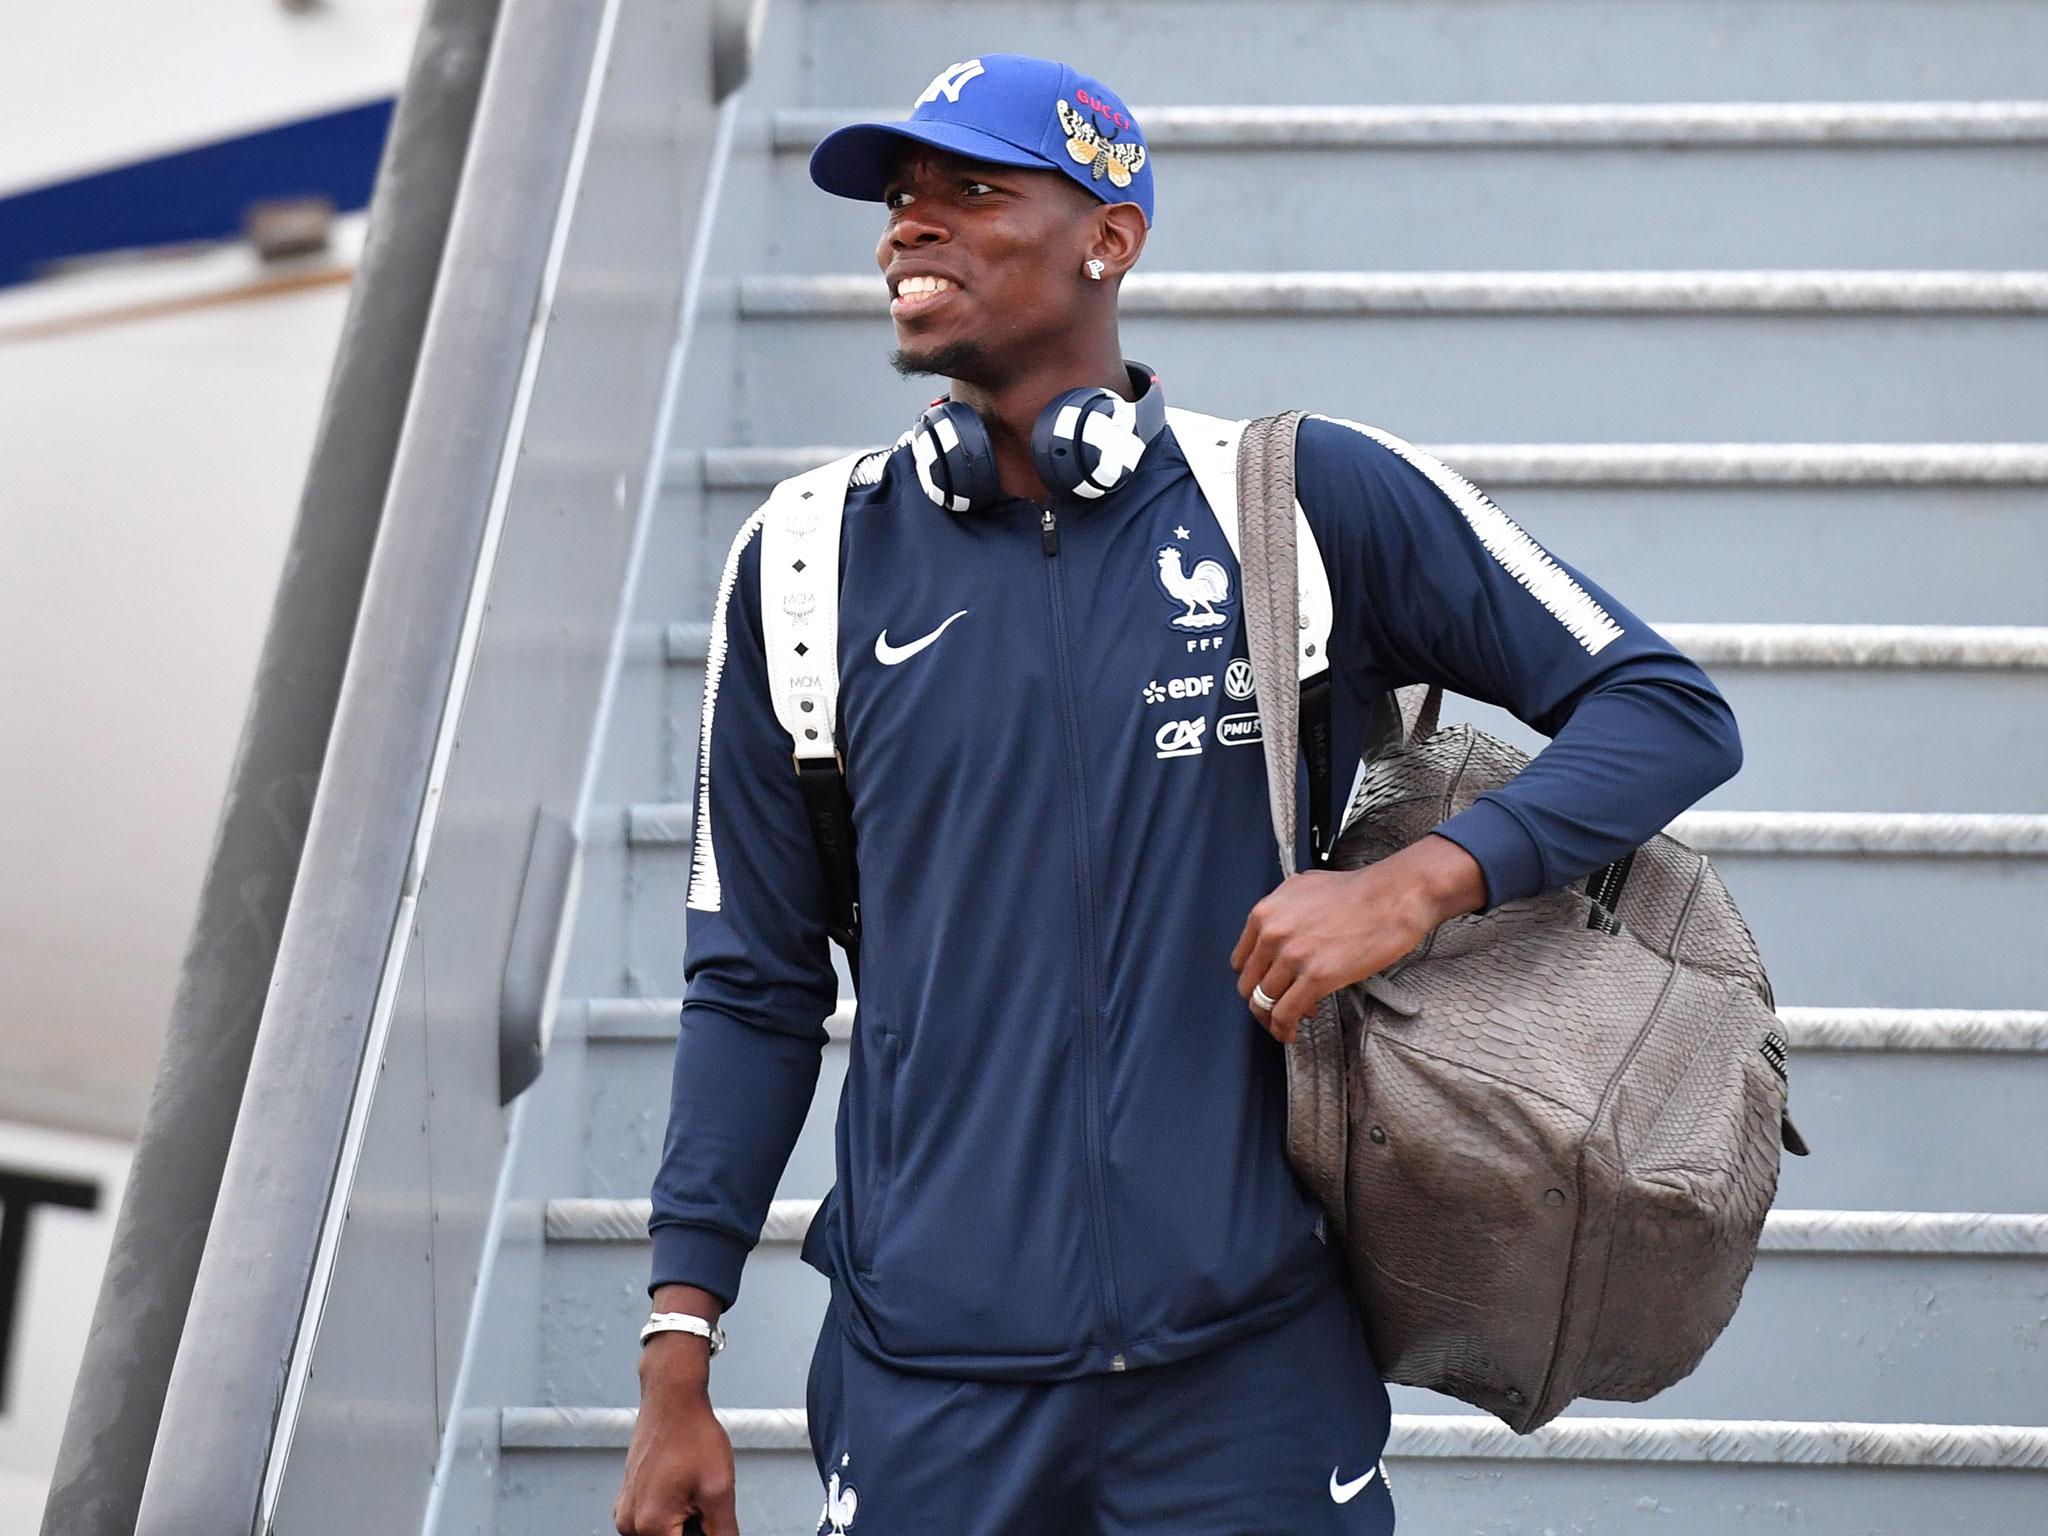 Desailly believes that Pogba has the ability to do more for France at this summer’s World Cup